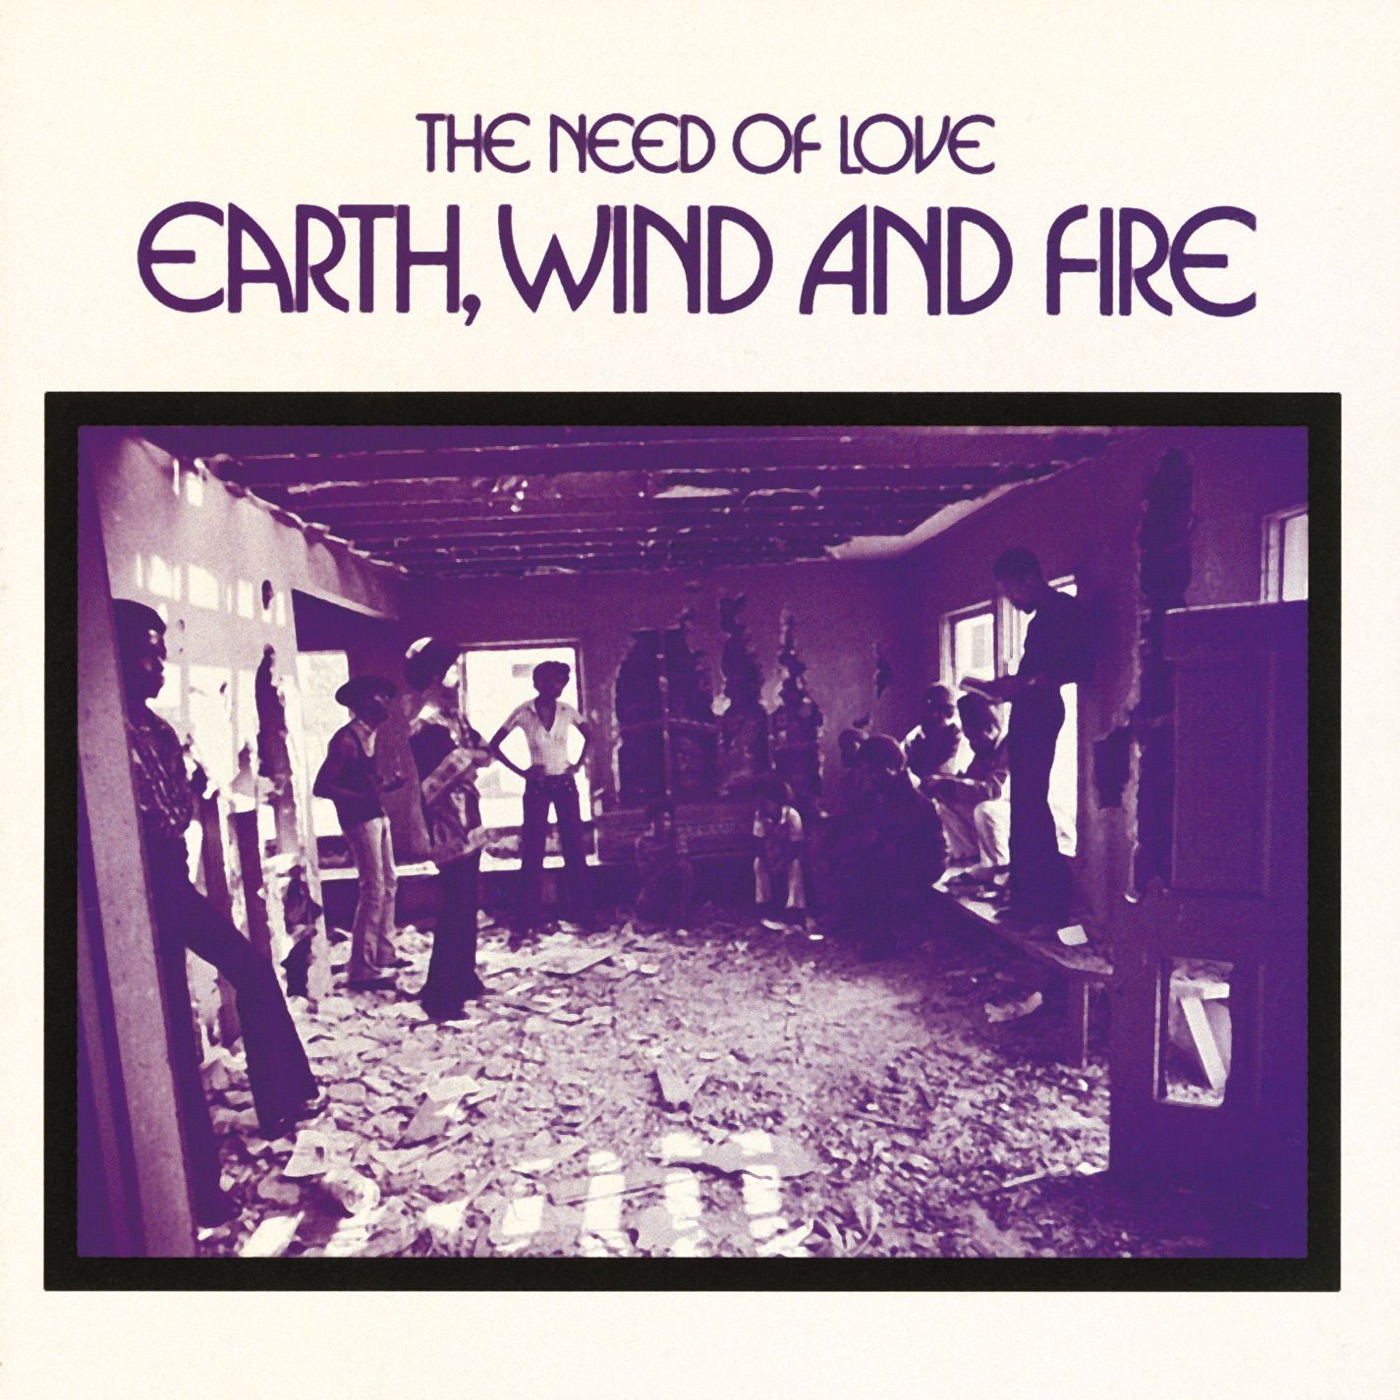 The Need of Love by Earth, Wind & Fire